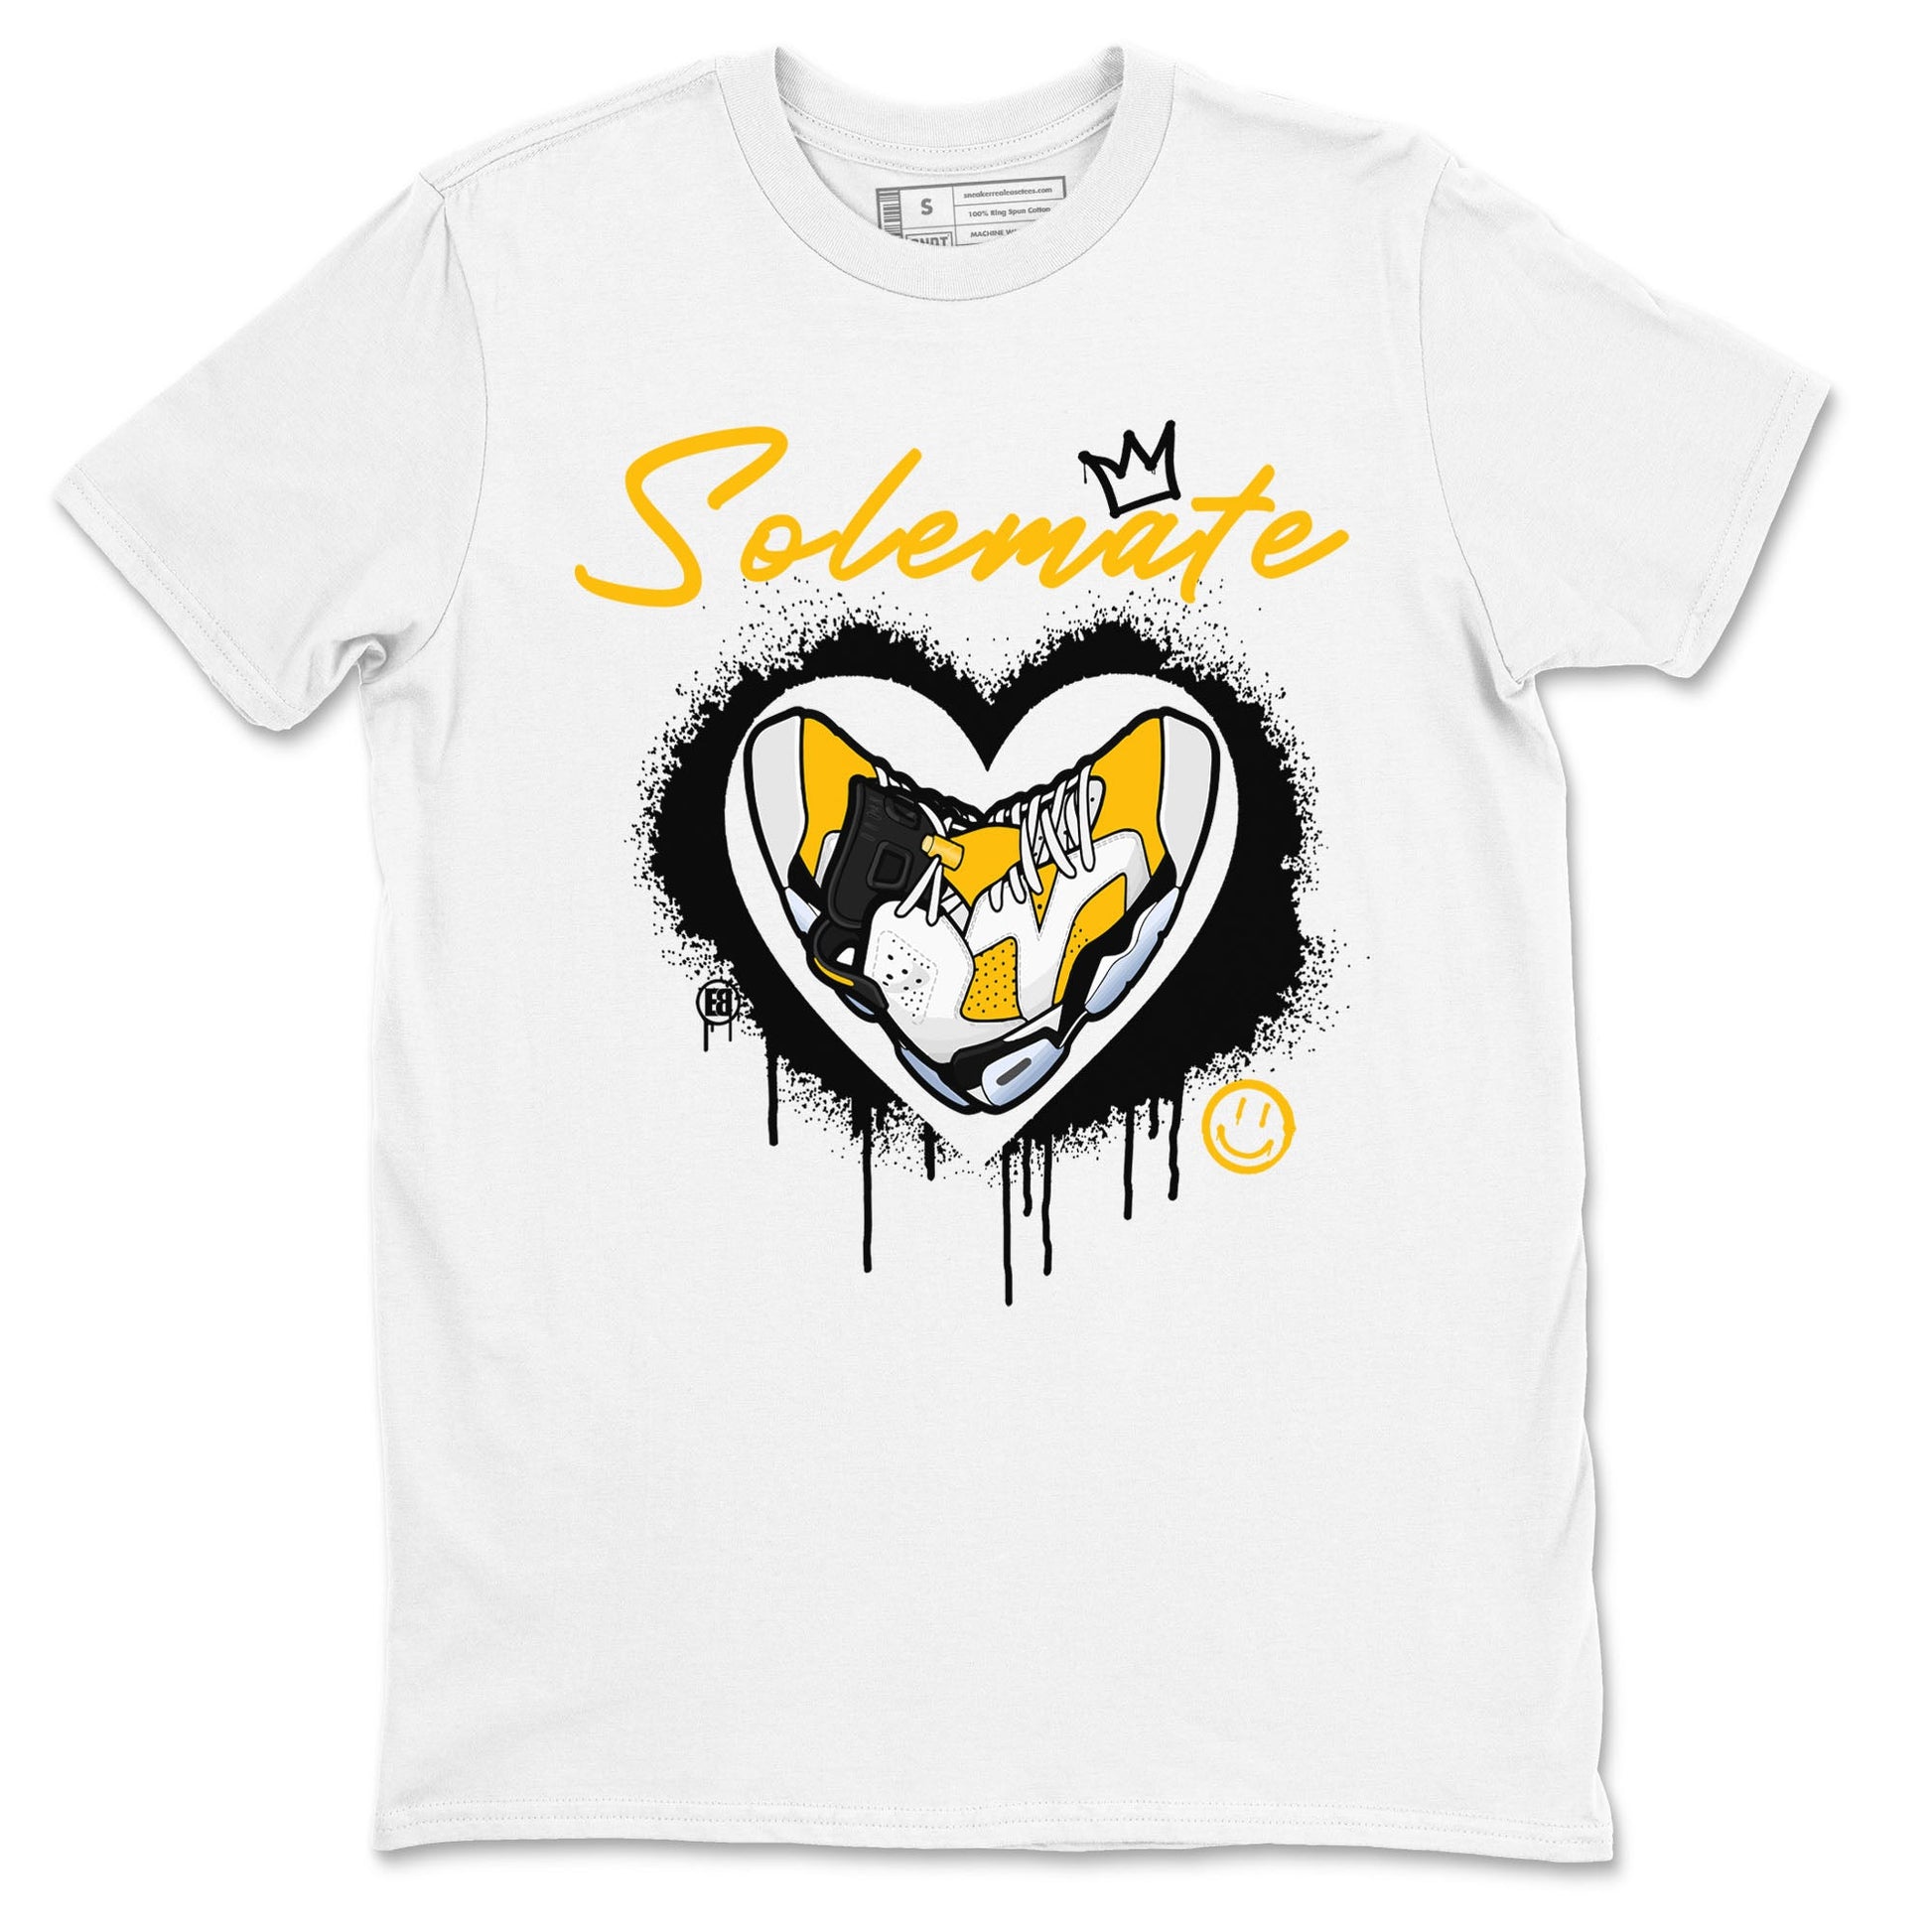 Solemate sneaker match tees to 6s Yellow Ochre street fashion brand for shirts to match Jordans SNRT Sneaker Tees Air Jordan 6 Yellow Ochre unisex t-shirt White 2 unisex shirt